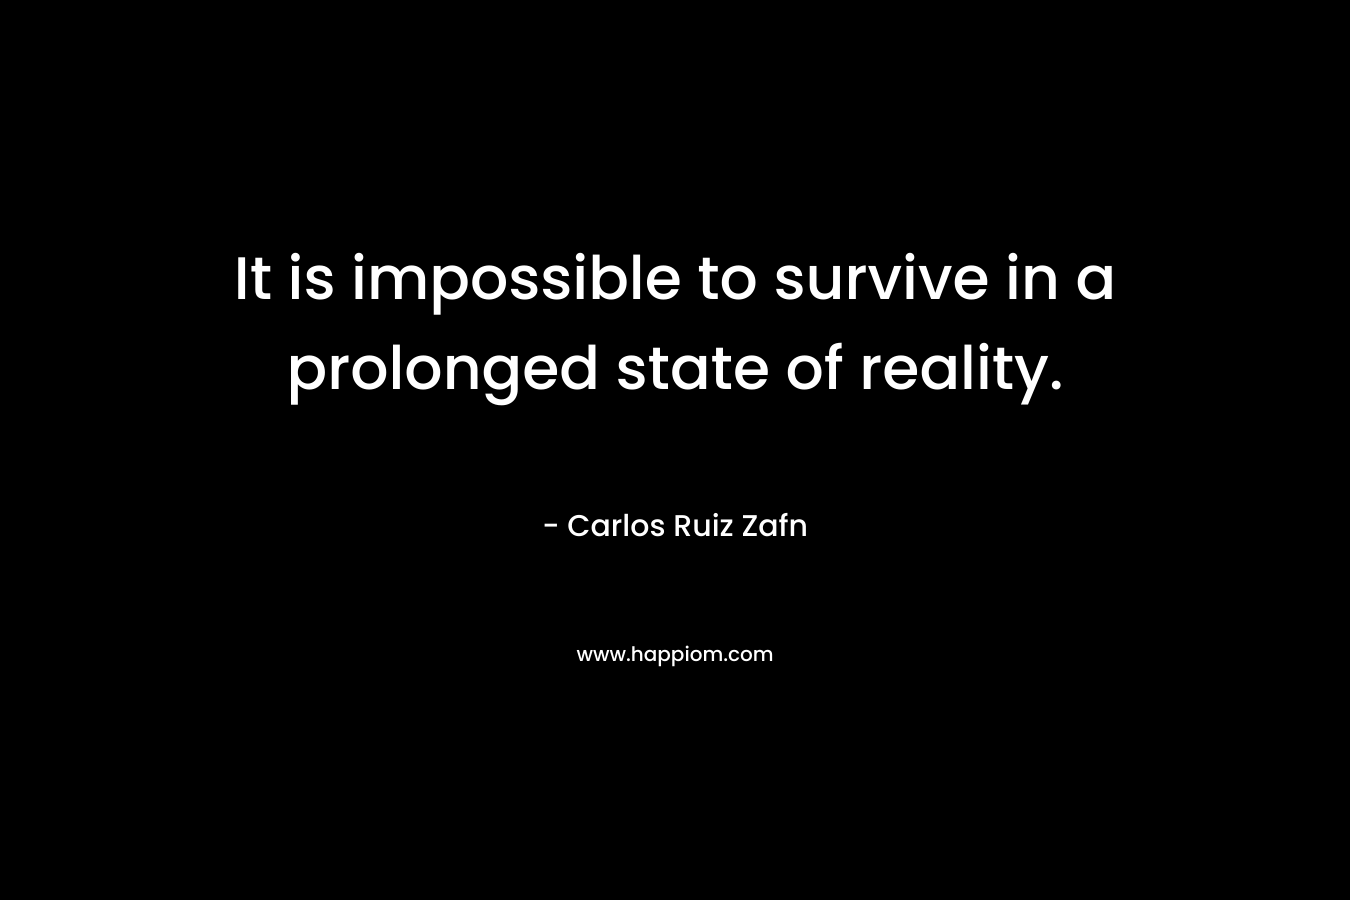 It is impossible to survive in a prolonged state of reality. – Carlos Ruiz Zafn